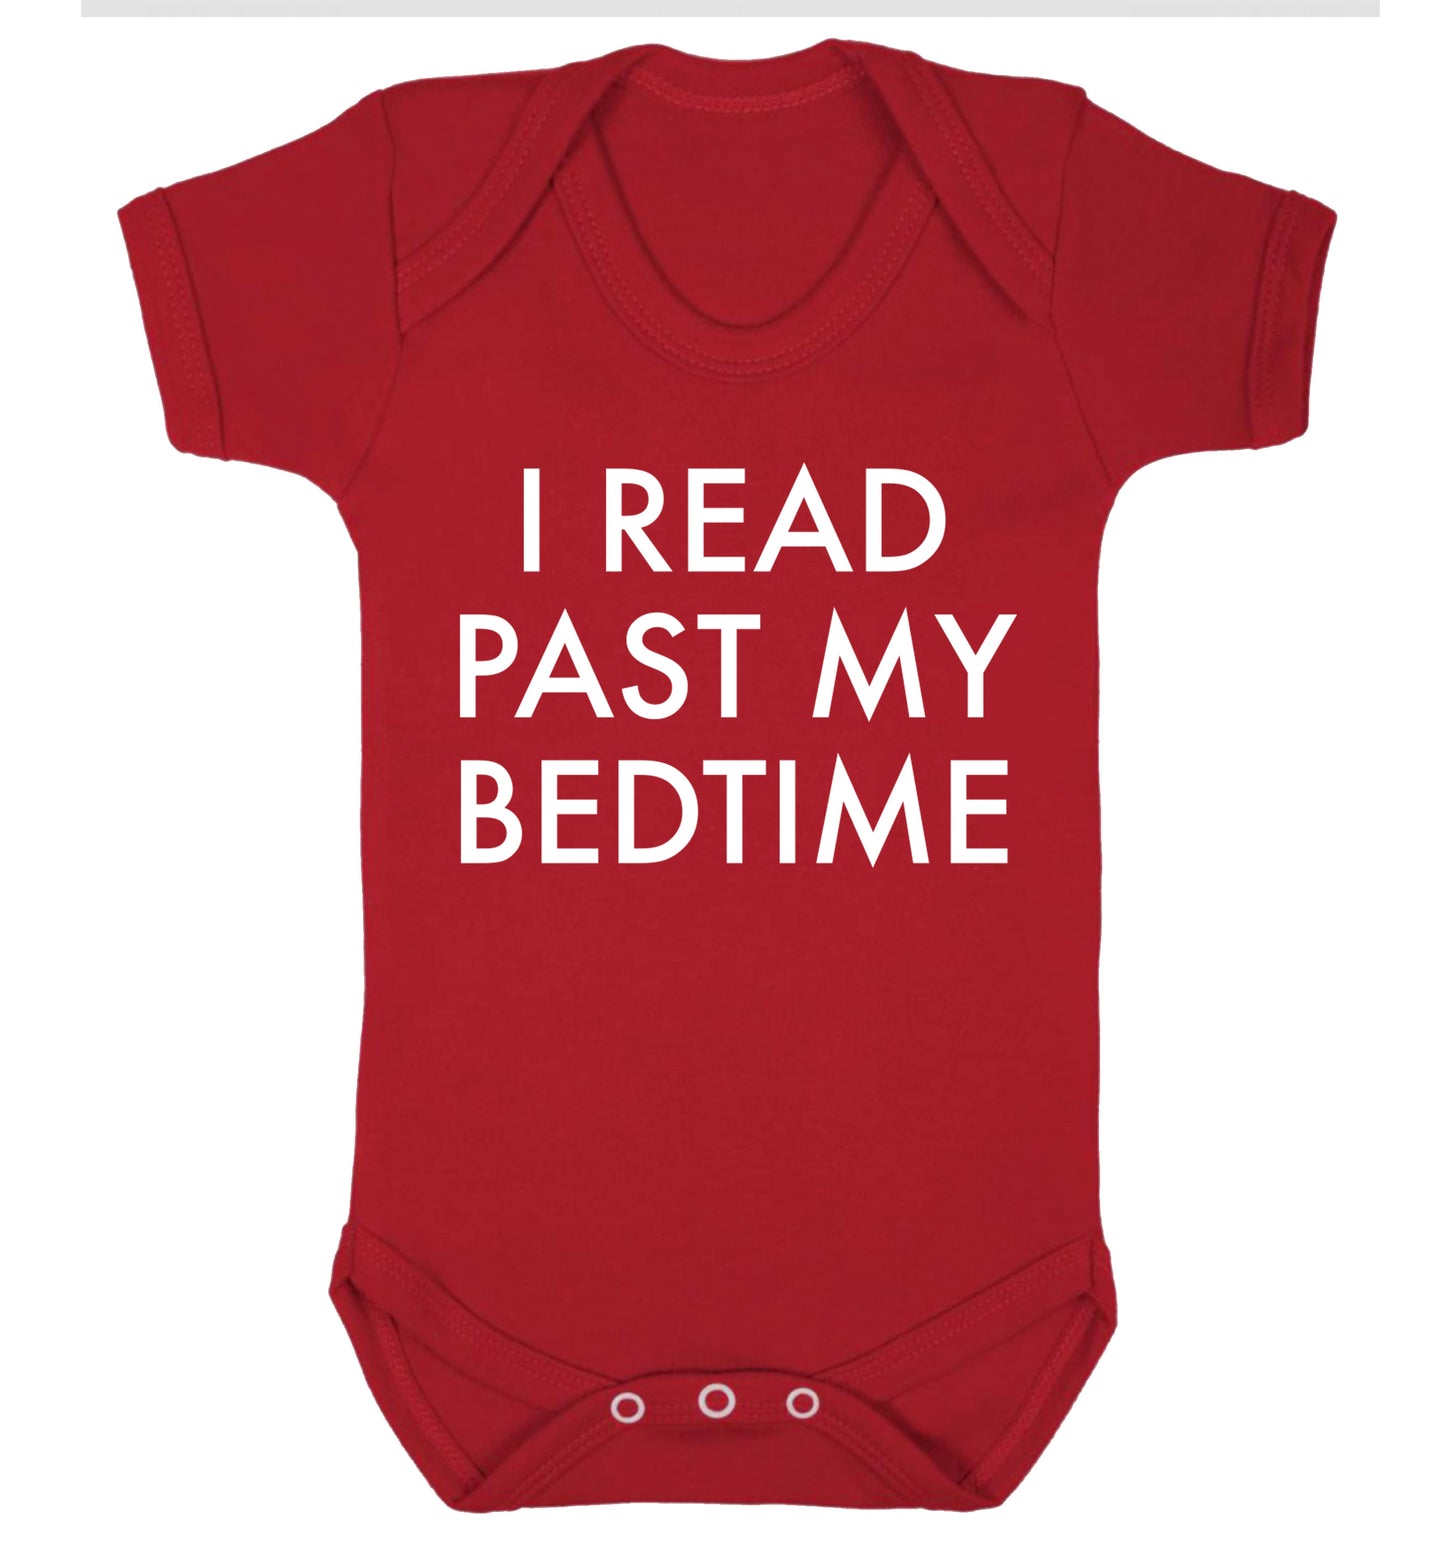 I read past my bedtime Baby Vest red 18-24 months